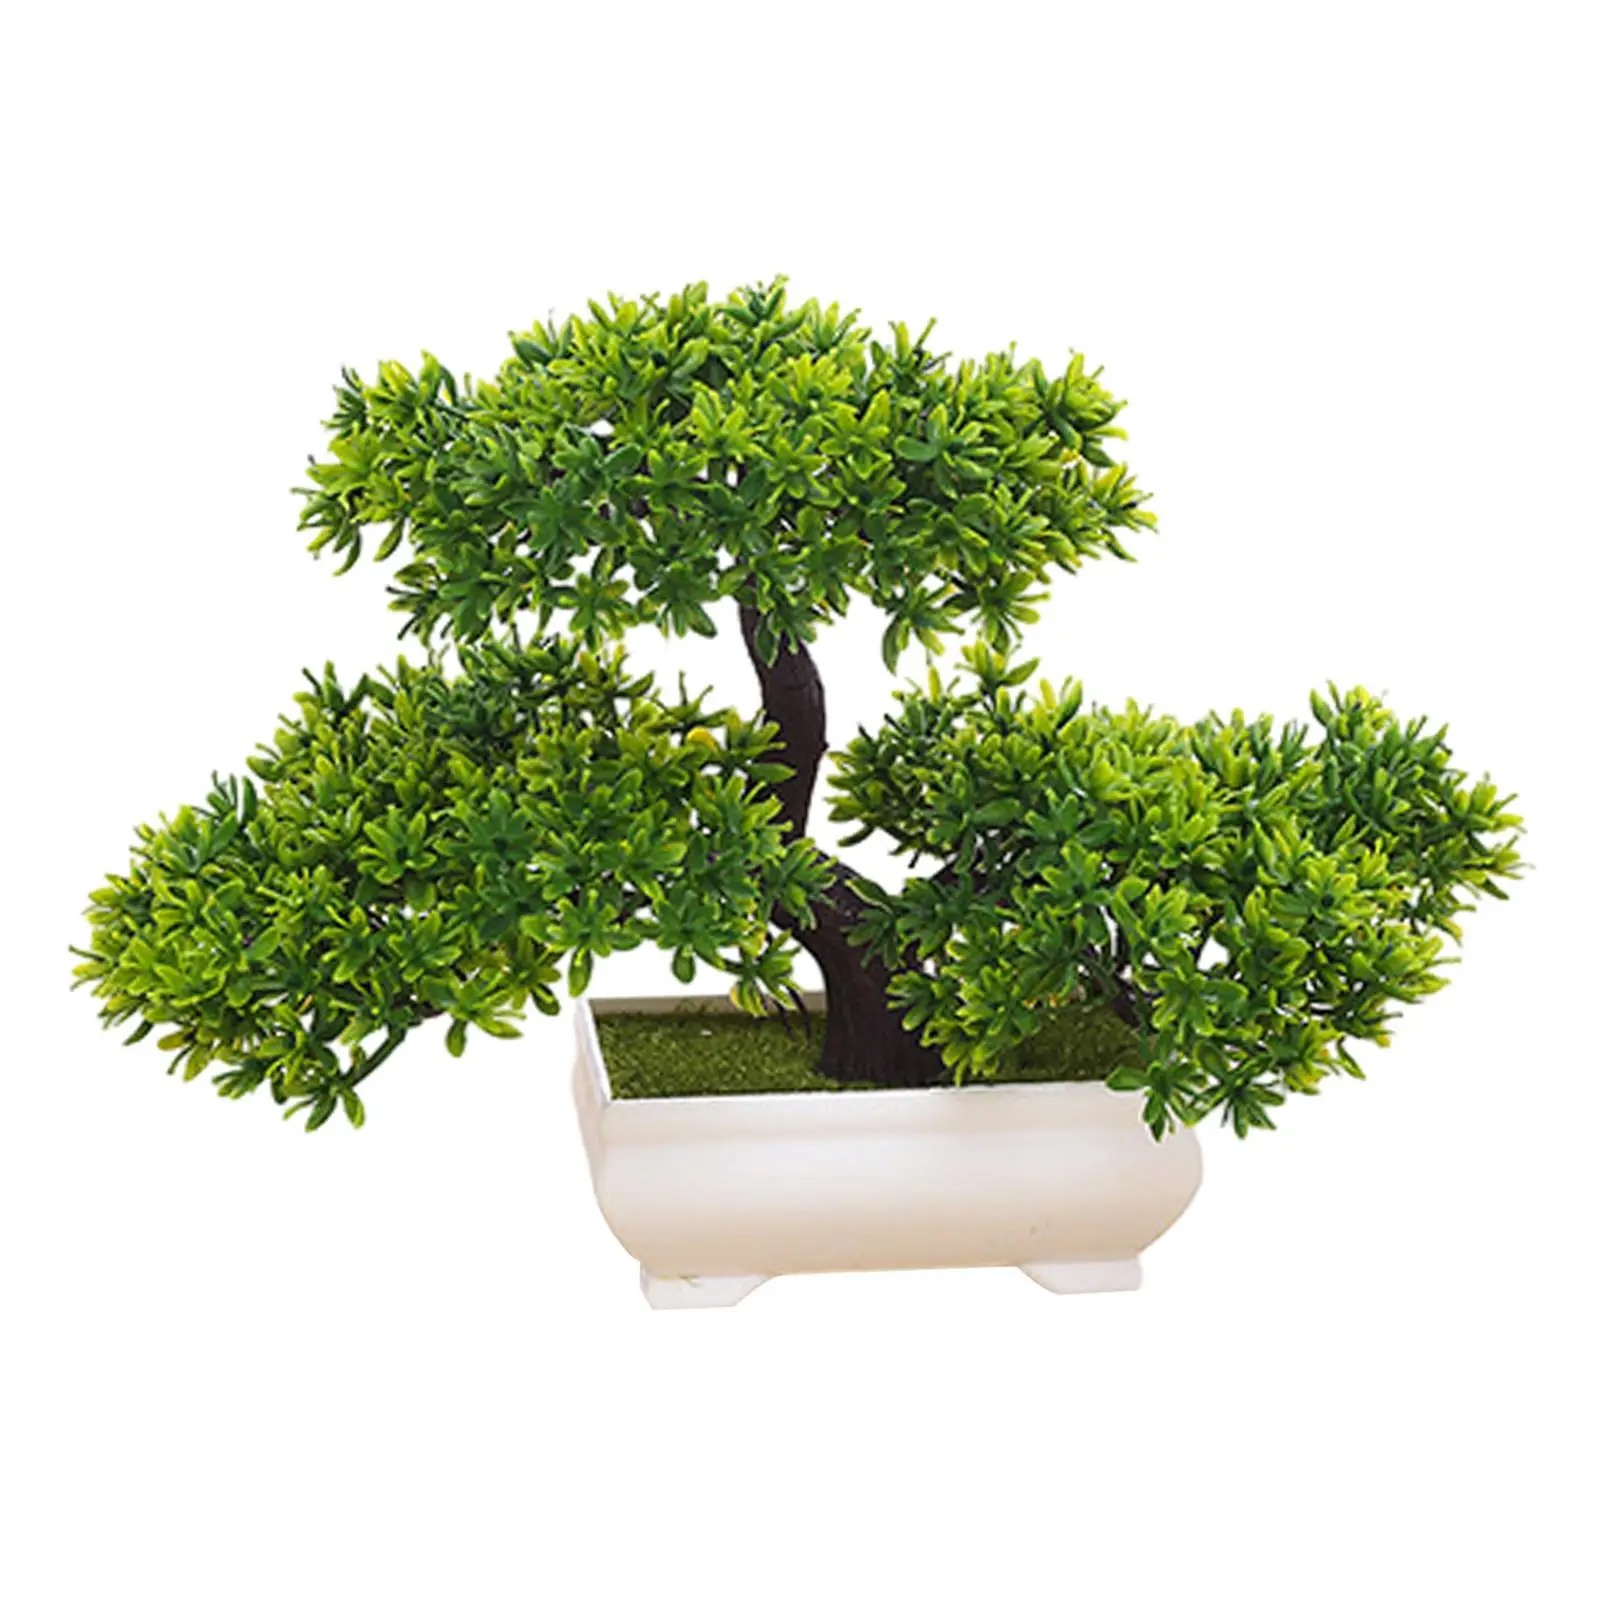 Artificial Bonsai Tree Centerpiece Desk with Pot Home Decor Potted Pine Tree for